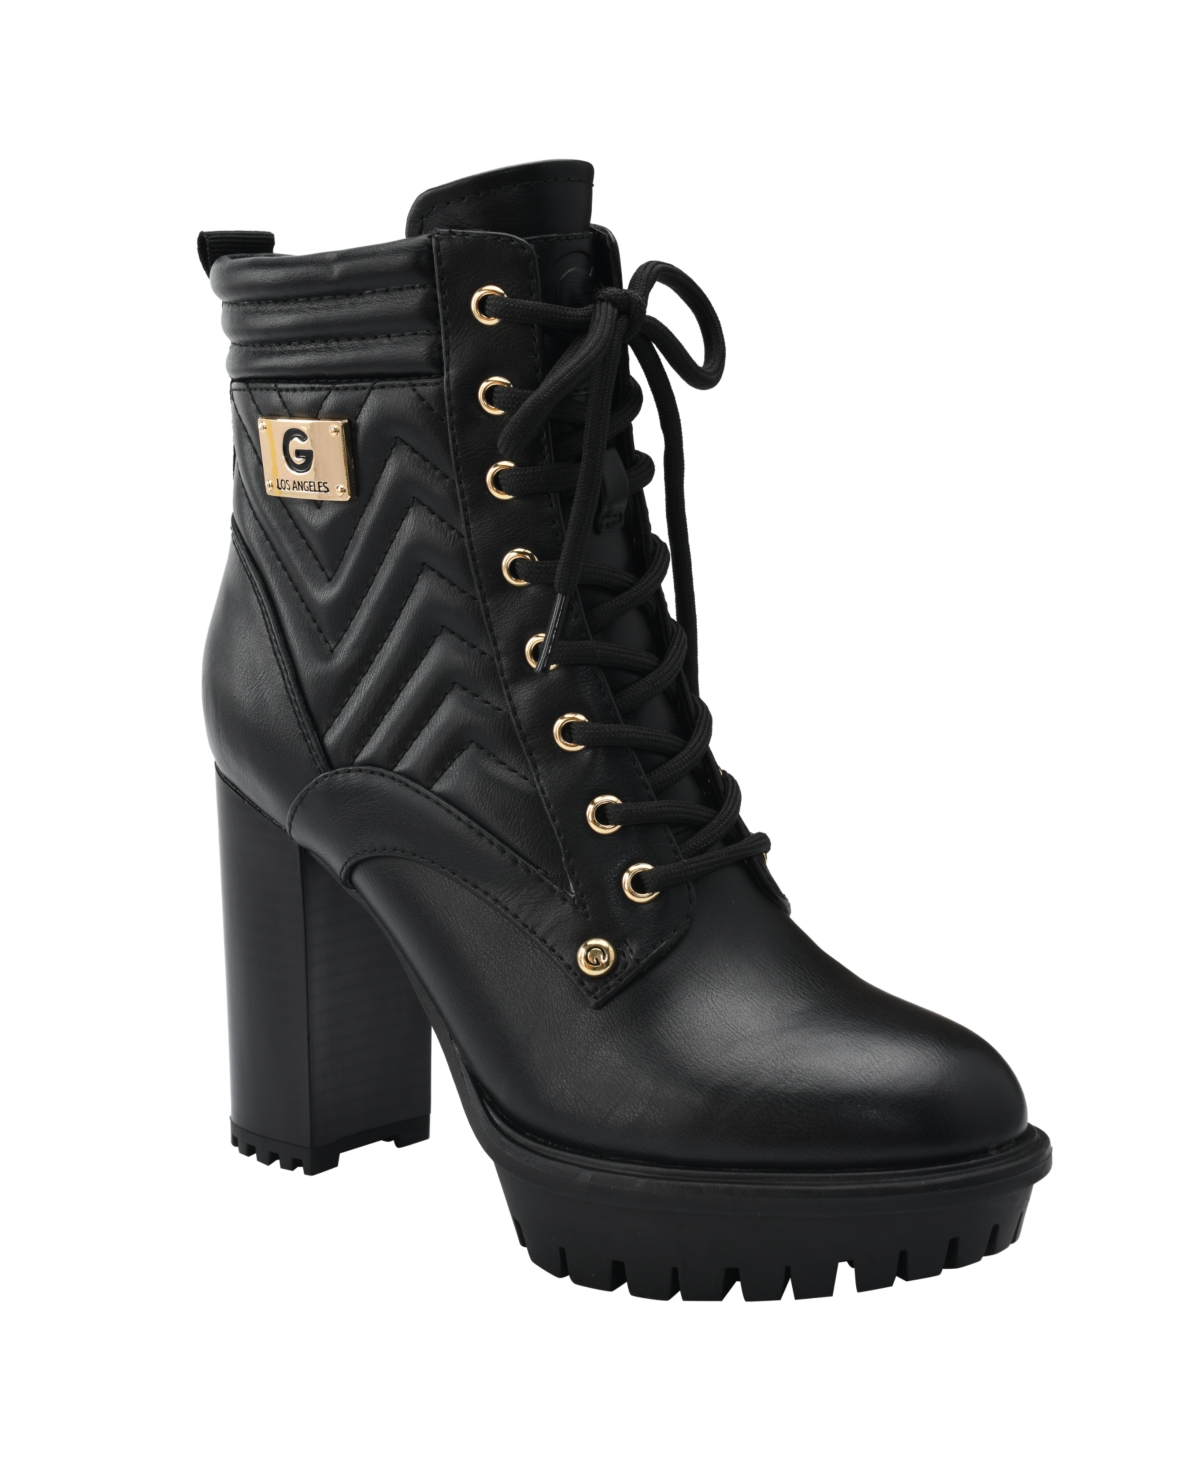 Gbg Los Angeles Women's Sellia Heeled Lug Sole Quilted Hiker Boots Women's Shoes In Black